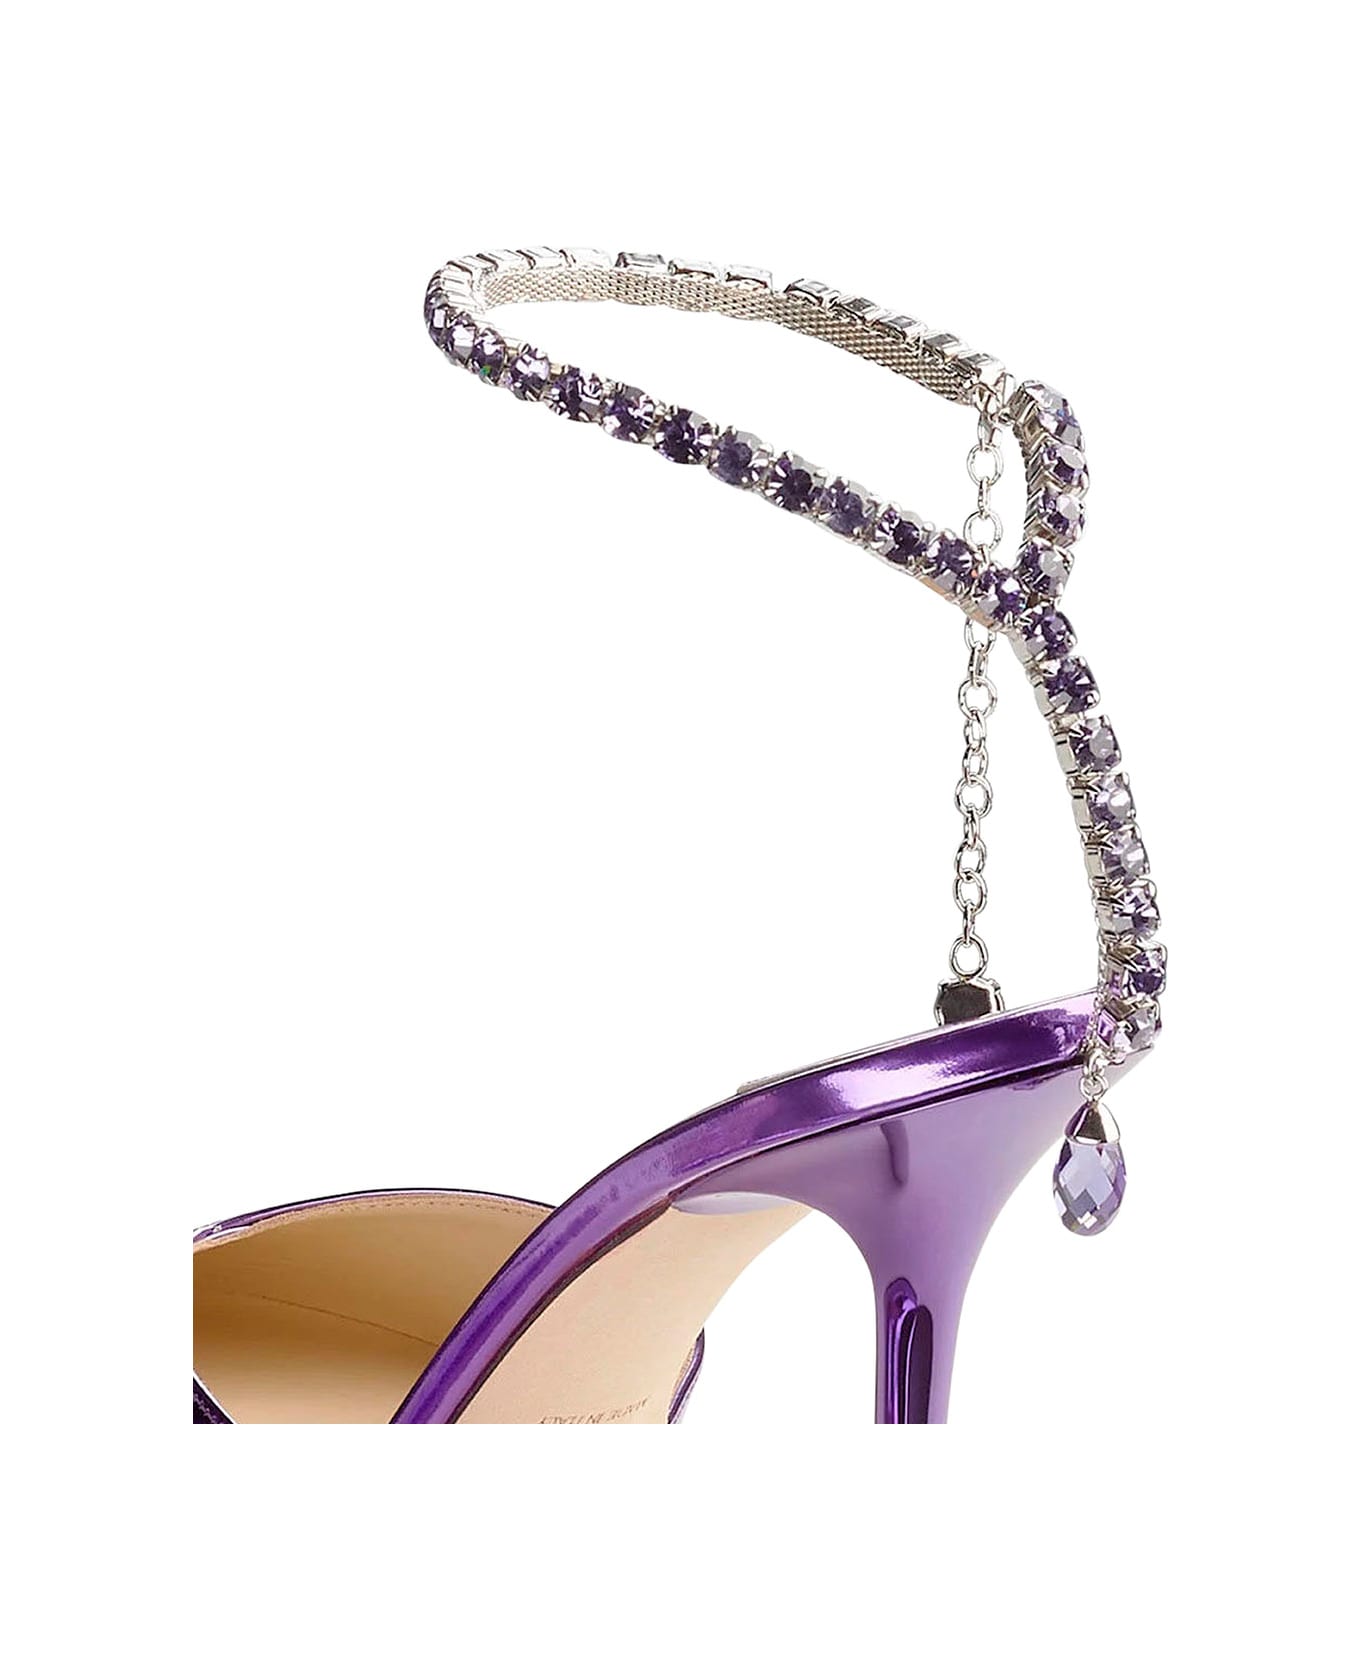 Jimmy Choo 'saeda' Purple Pointed And Closed Toe Sandals With Rhinestone Chain In Metallic Leather Woman - Violet ハイヒール